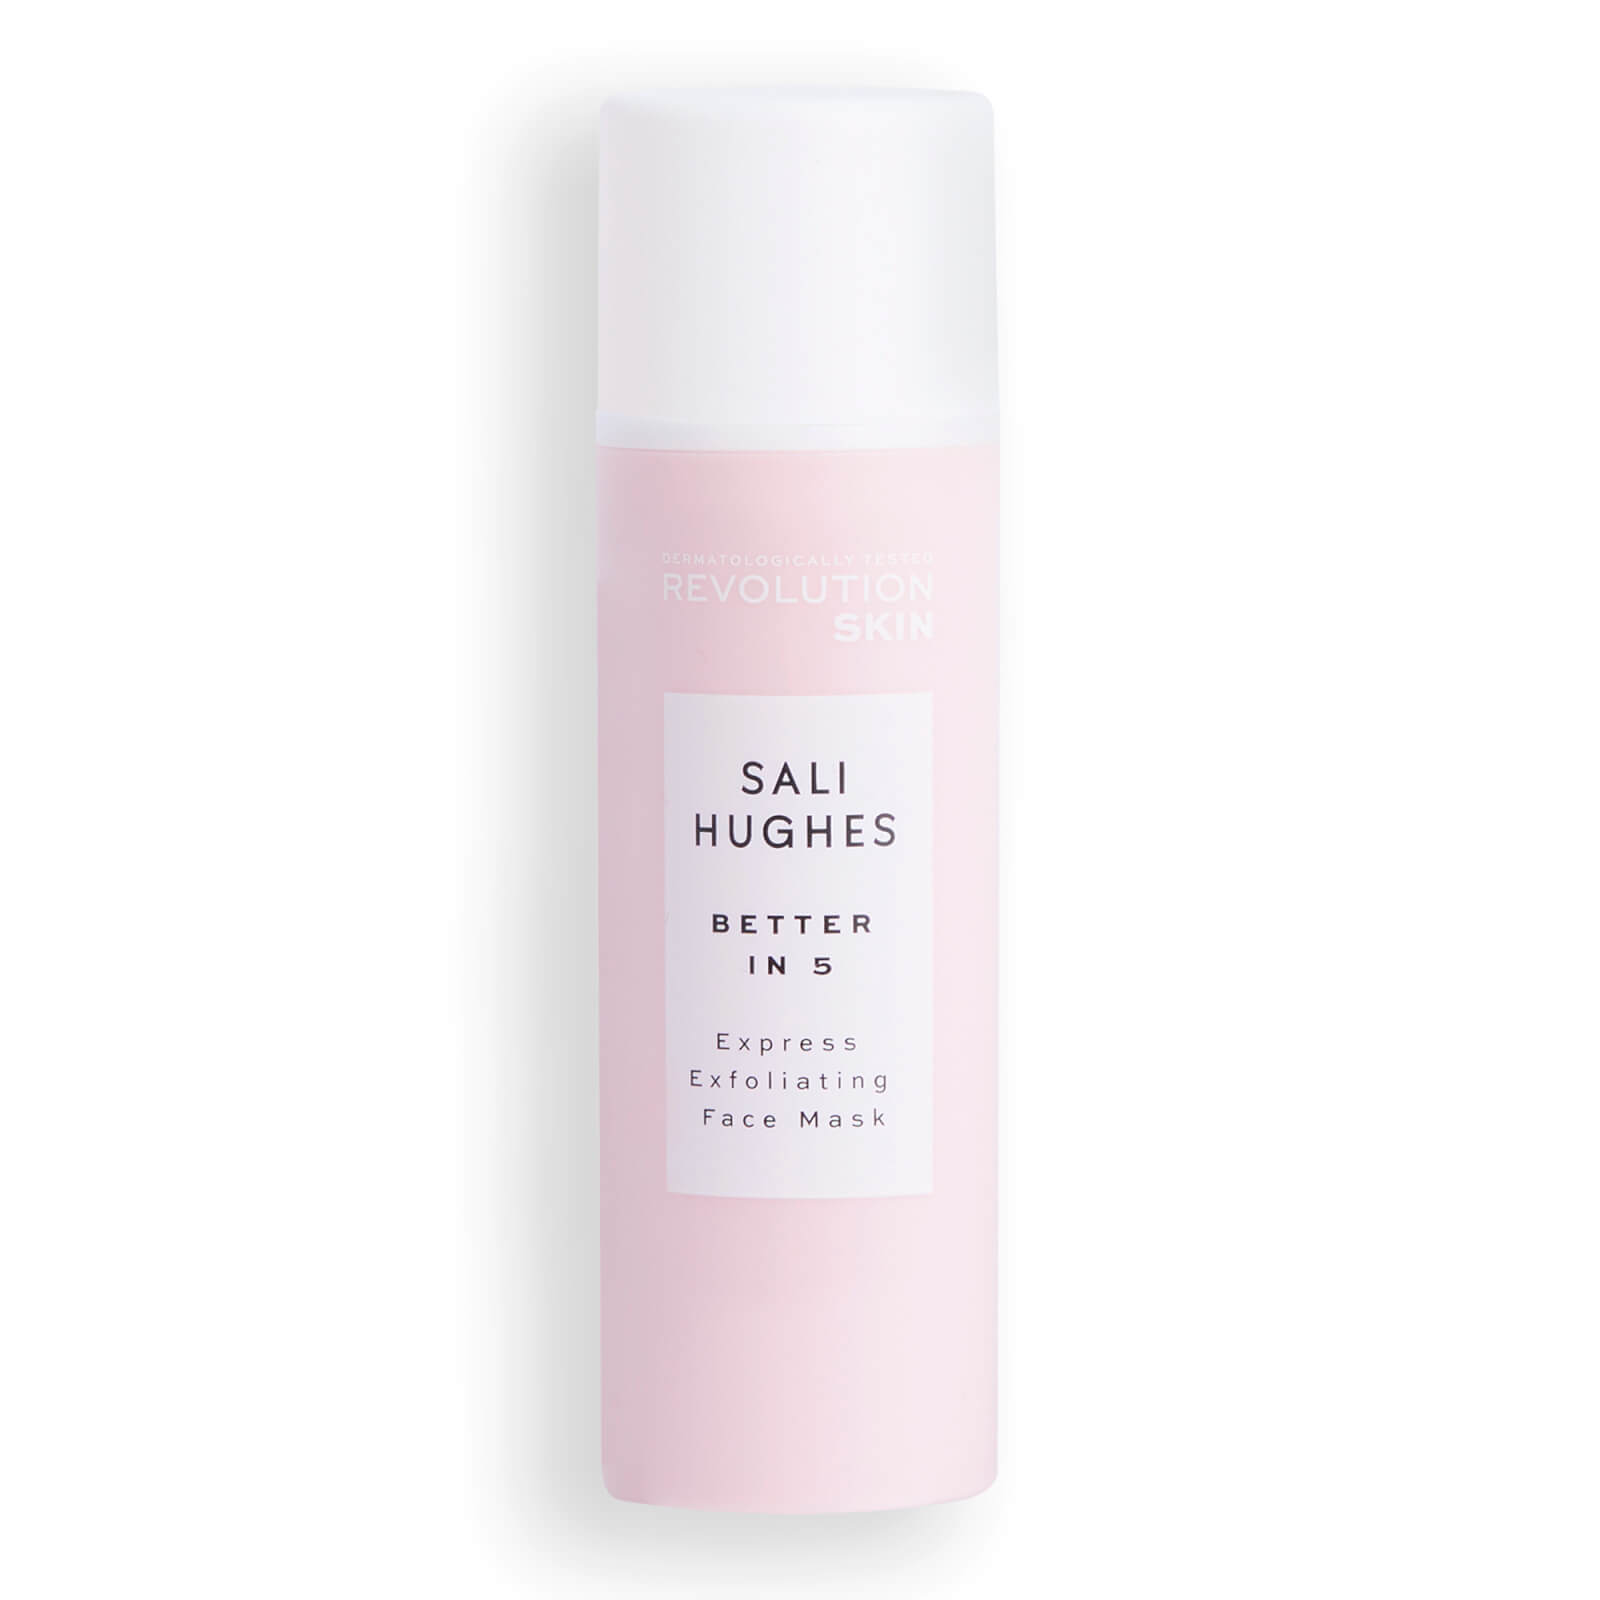 Image of Revolution X Sali Hughes - Better in 5 Express Exfoliating Mask